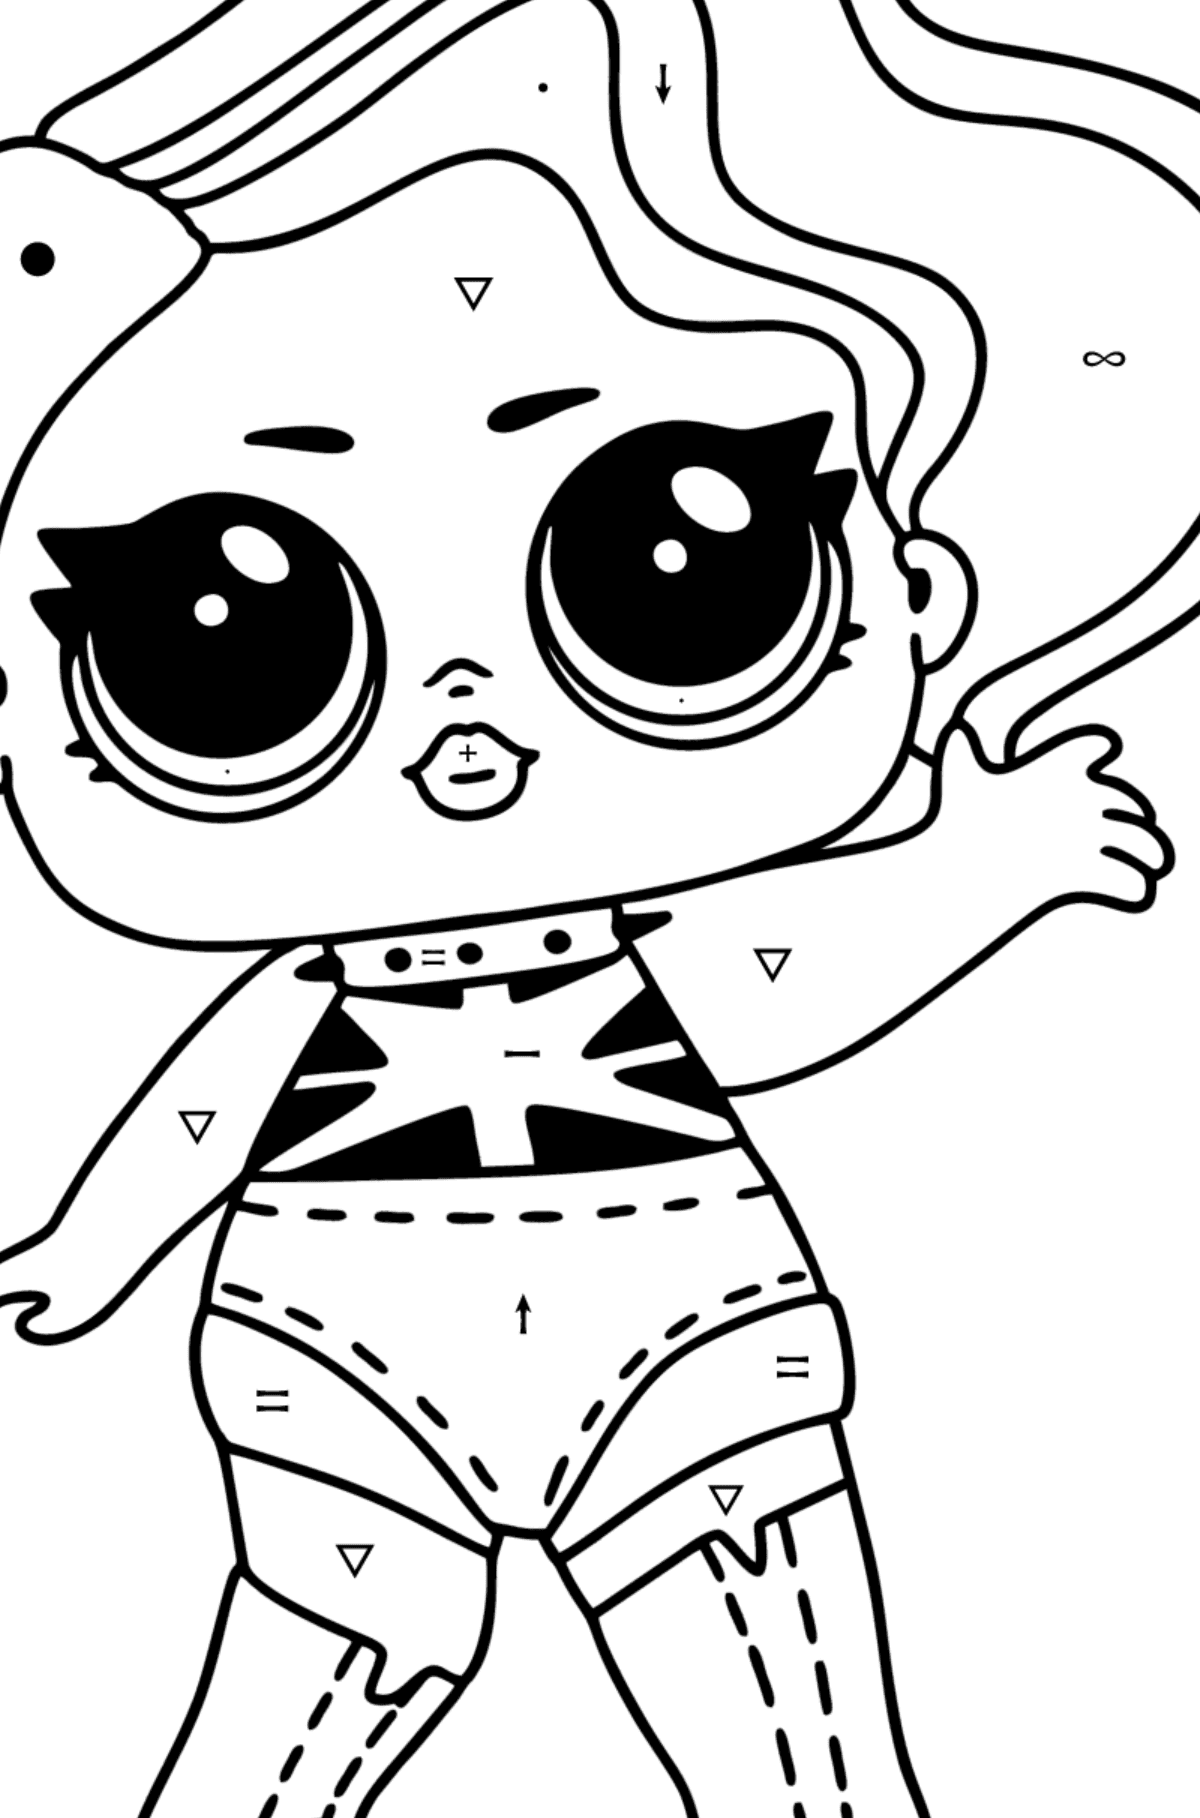 LOL Surprise Cheeky babe coloring page - Coloring by Symbols for Kids